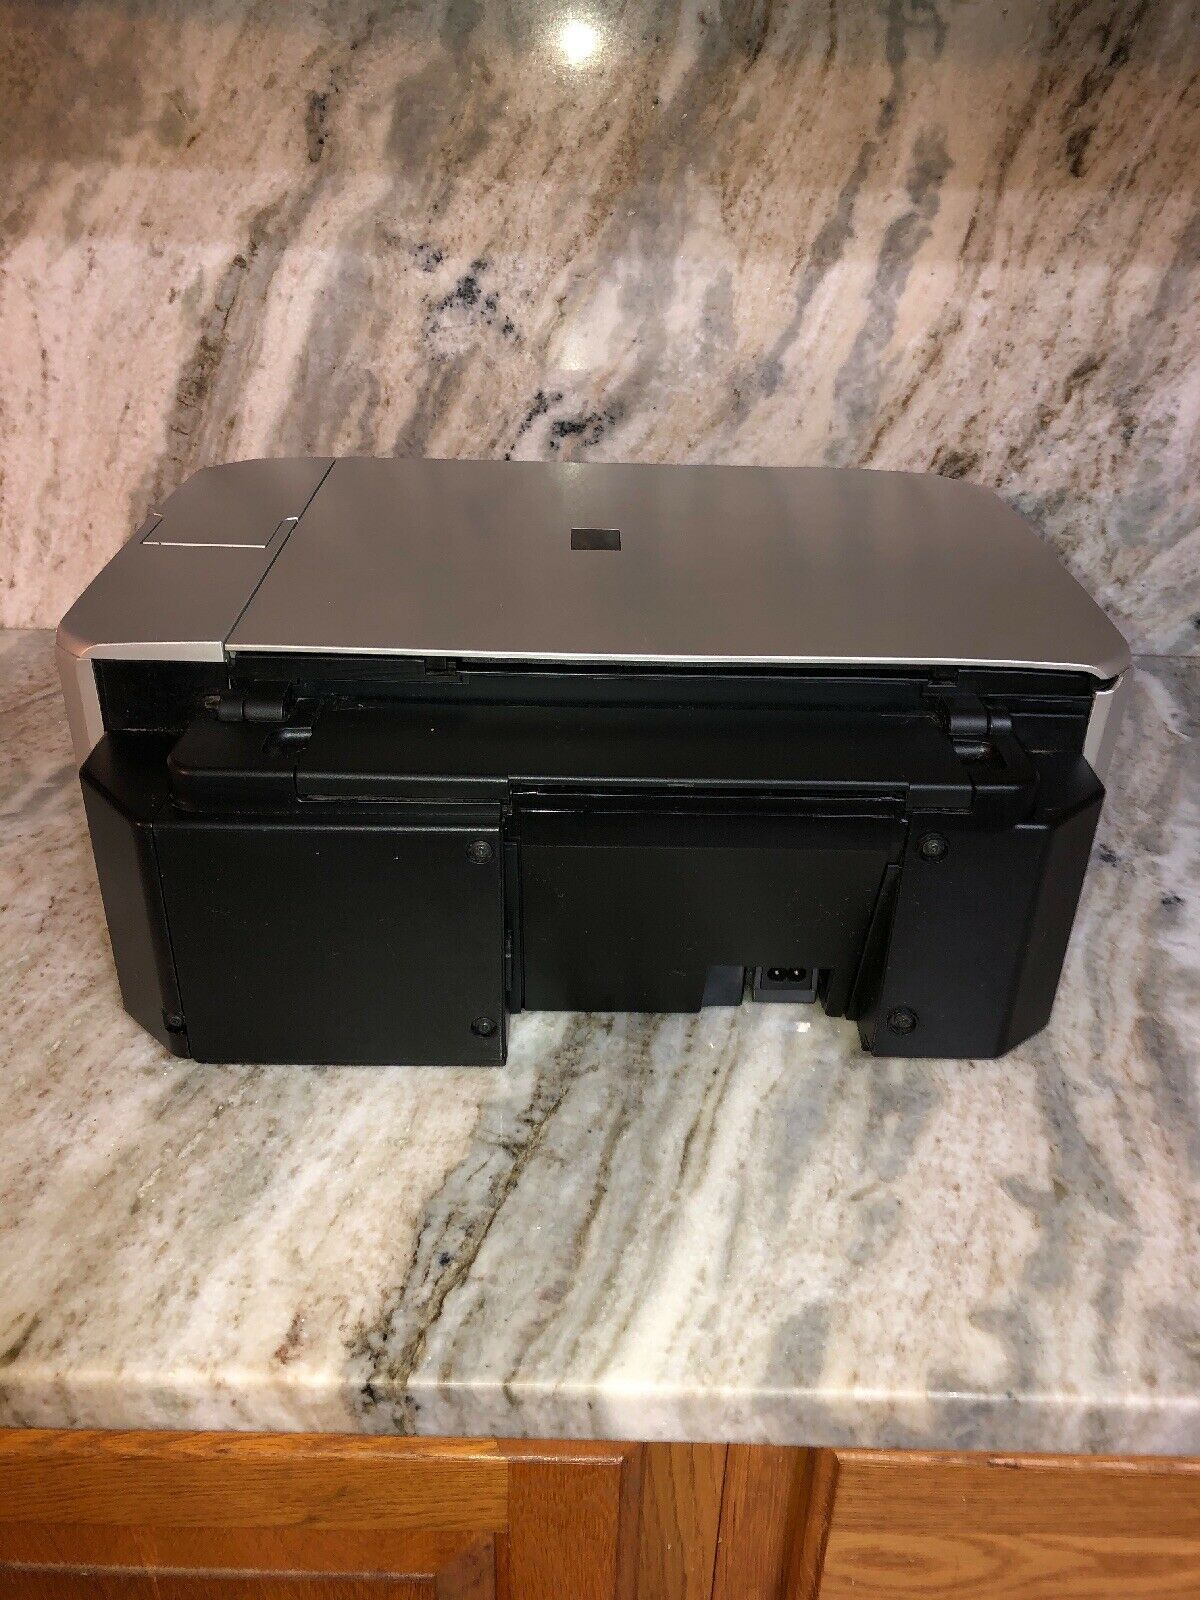 canon mp470 printer does not print